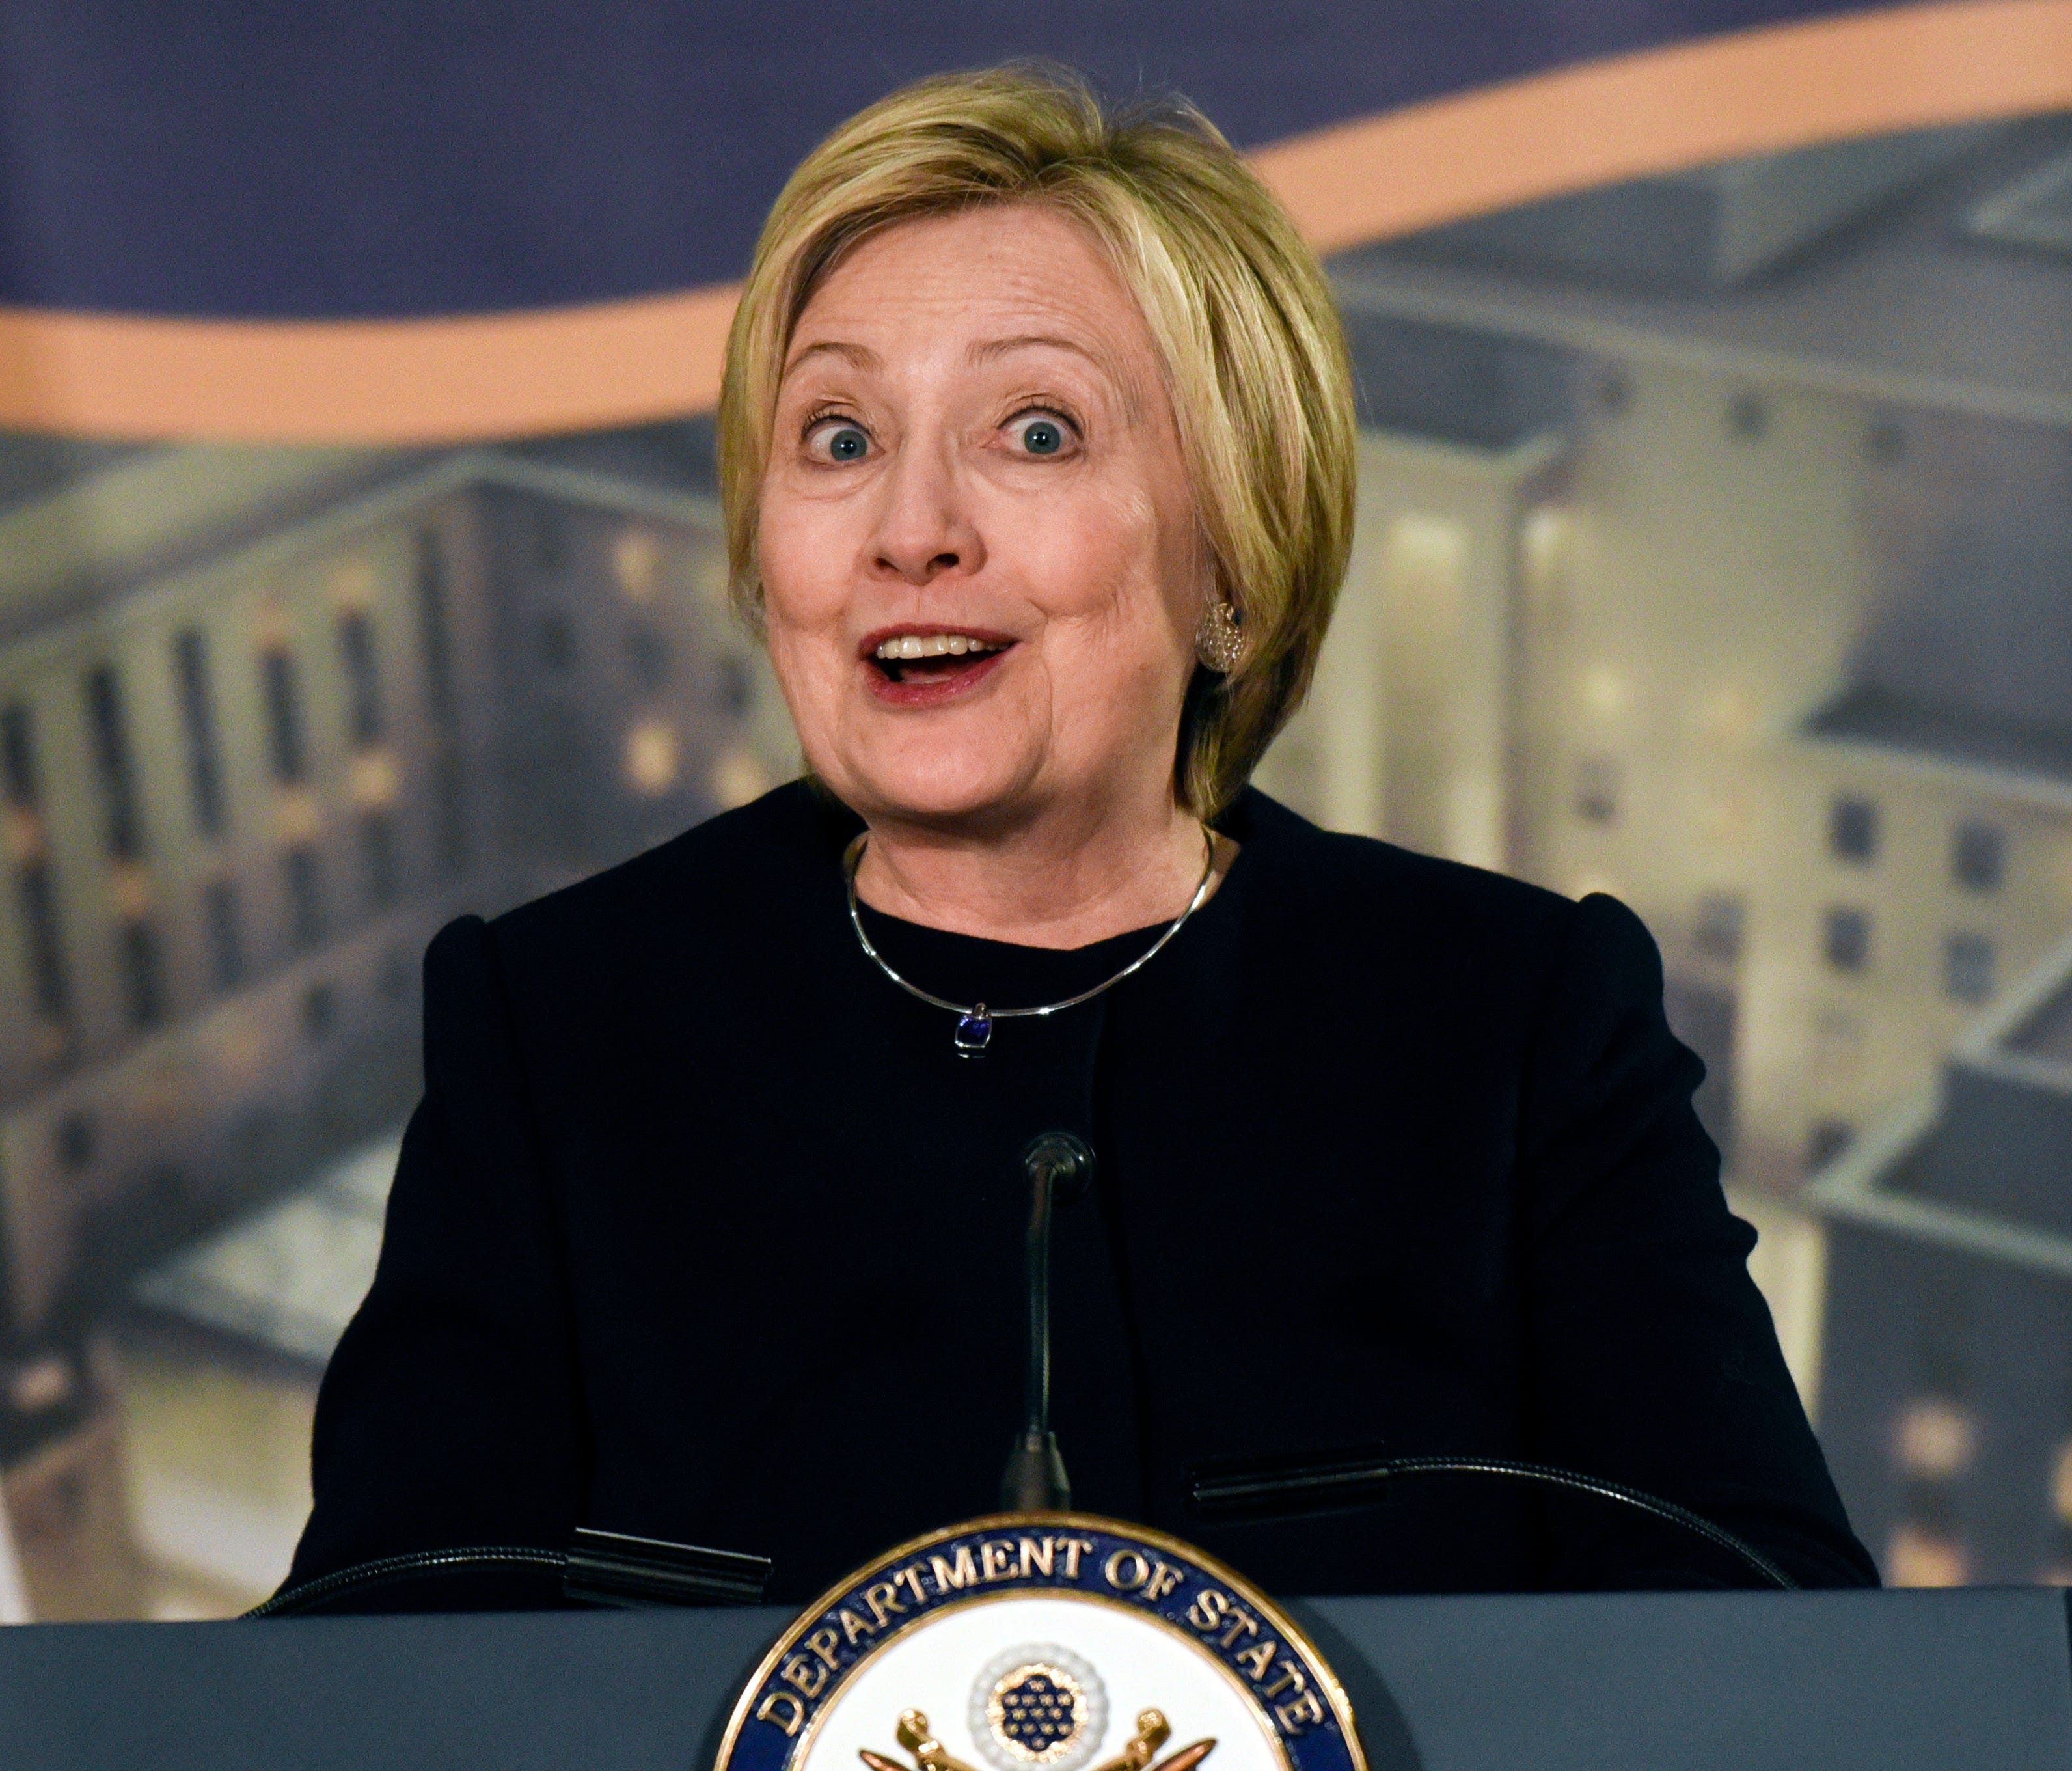 Former Secretary of State Hillary Clinton speaks at a reception celebrating the completion of the U.S. Diplomacy Center Pavilion at the State Department in Washington, D.C., Jan. 10, 2017.